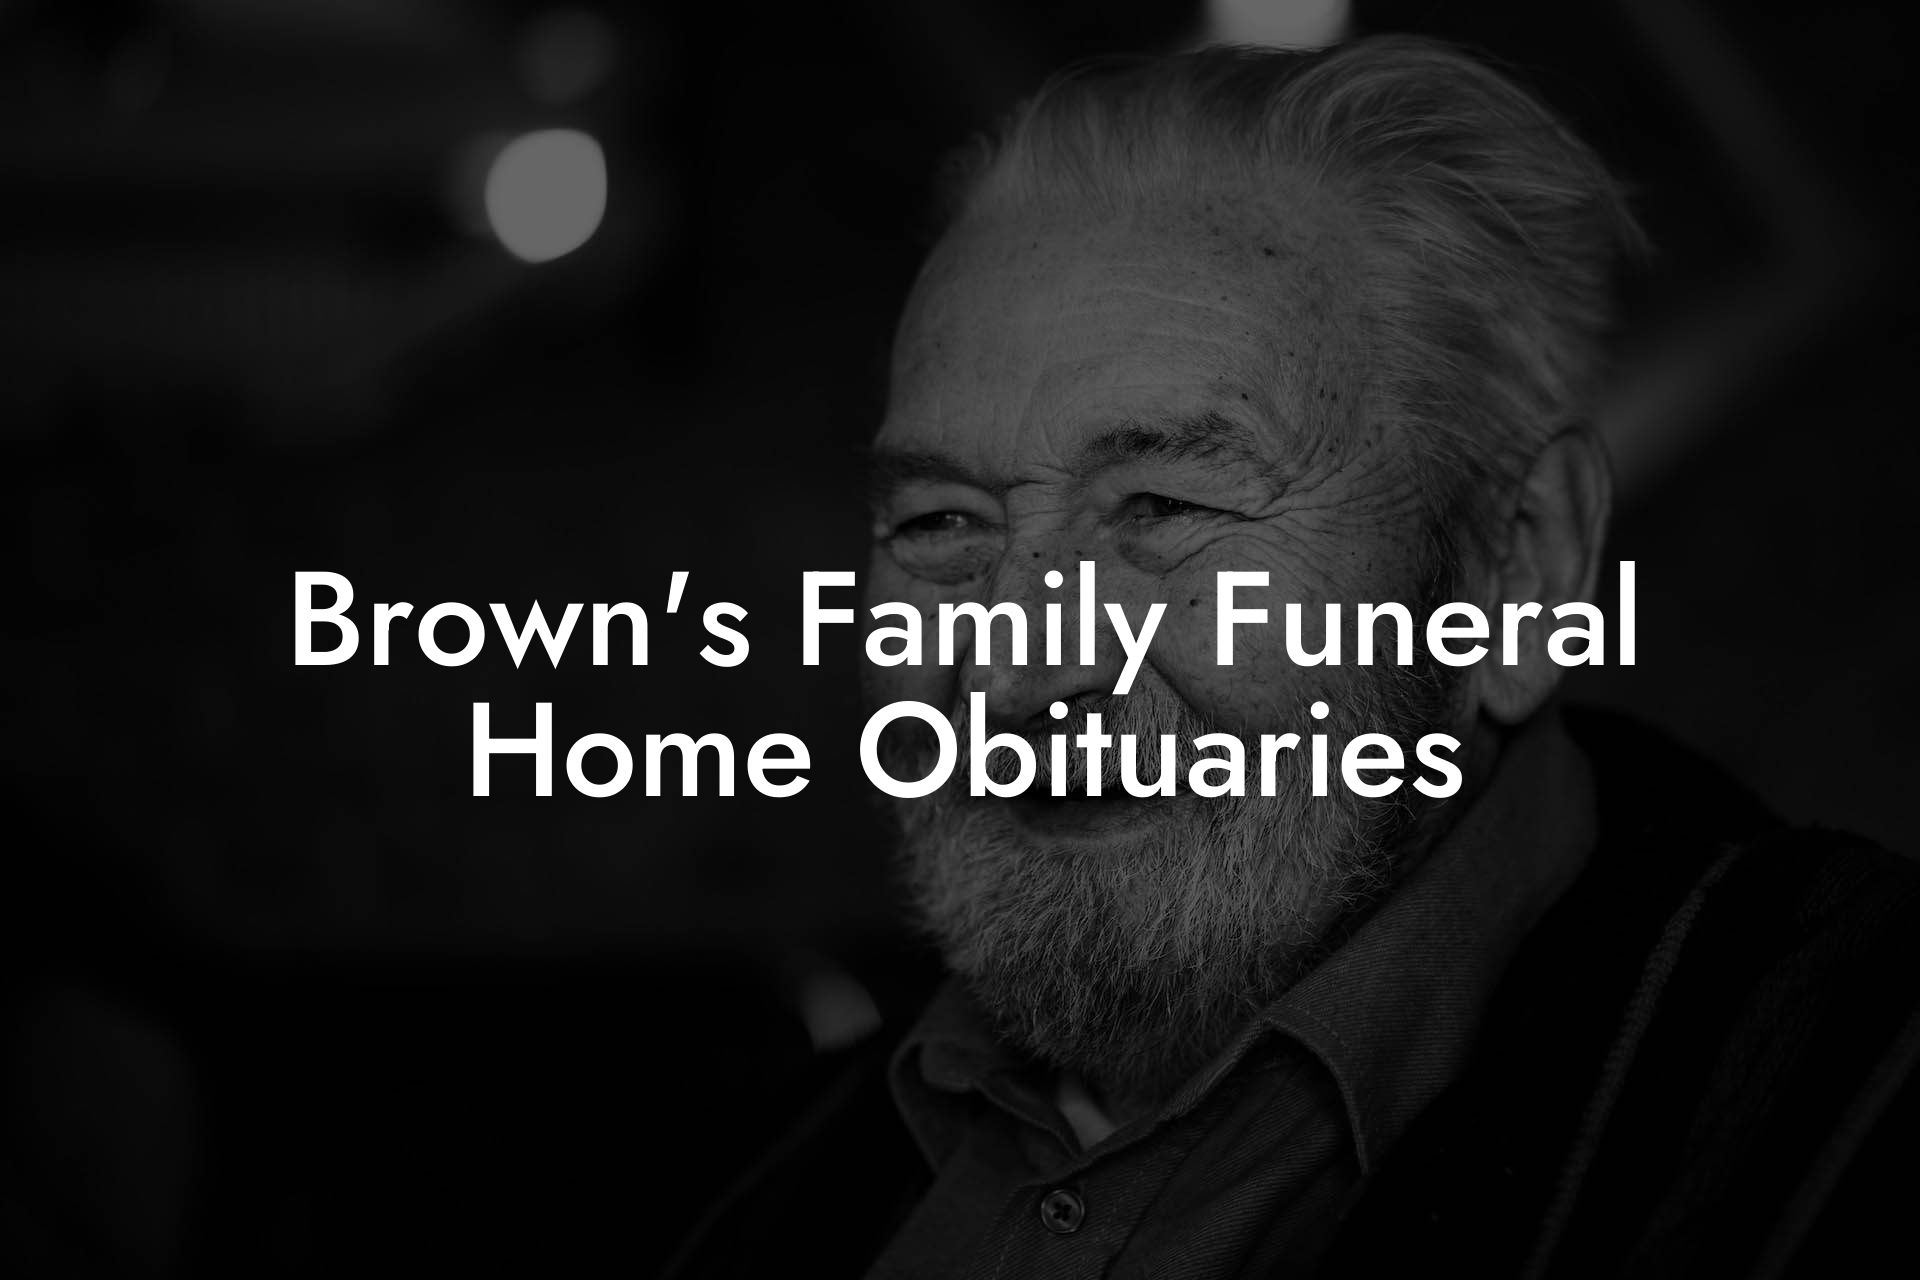 Brown's Family Funeral Home Obituaries